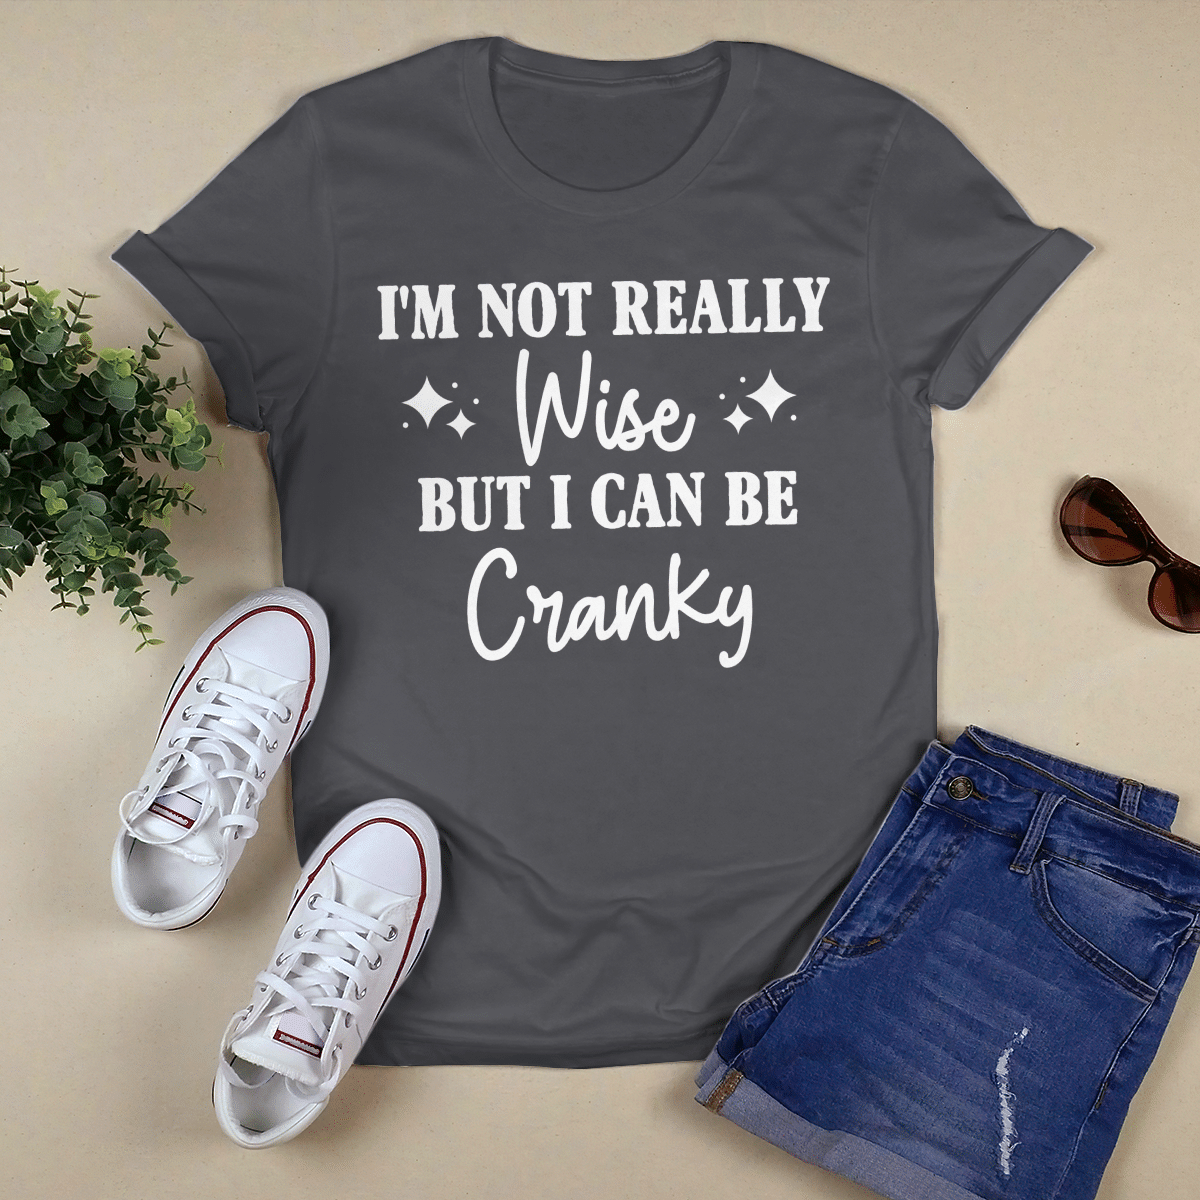 I_m Not Really Wise shirt